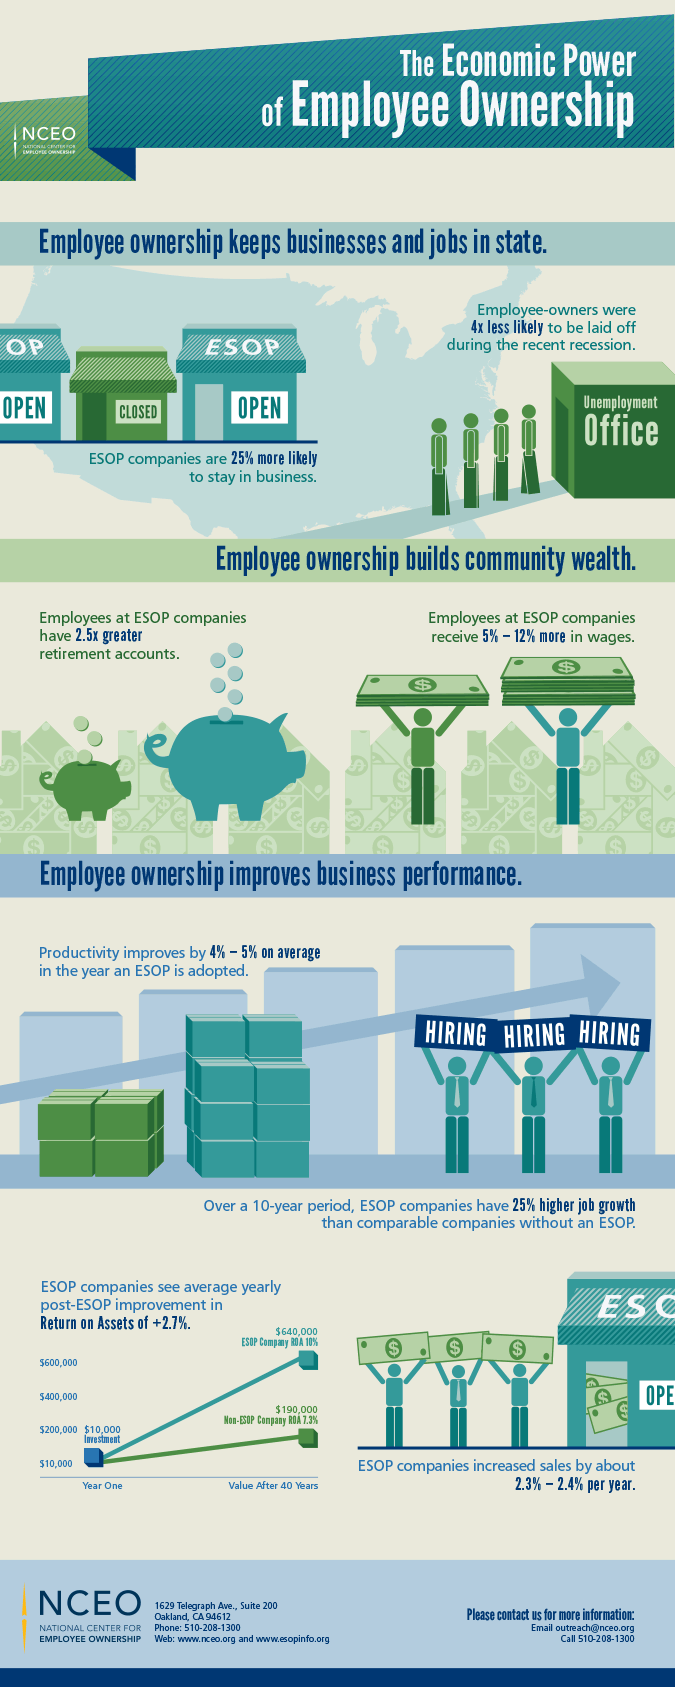 The Economic Power of Employee Ownership